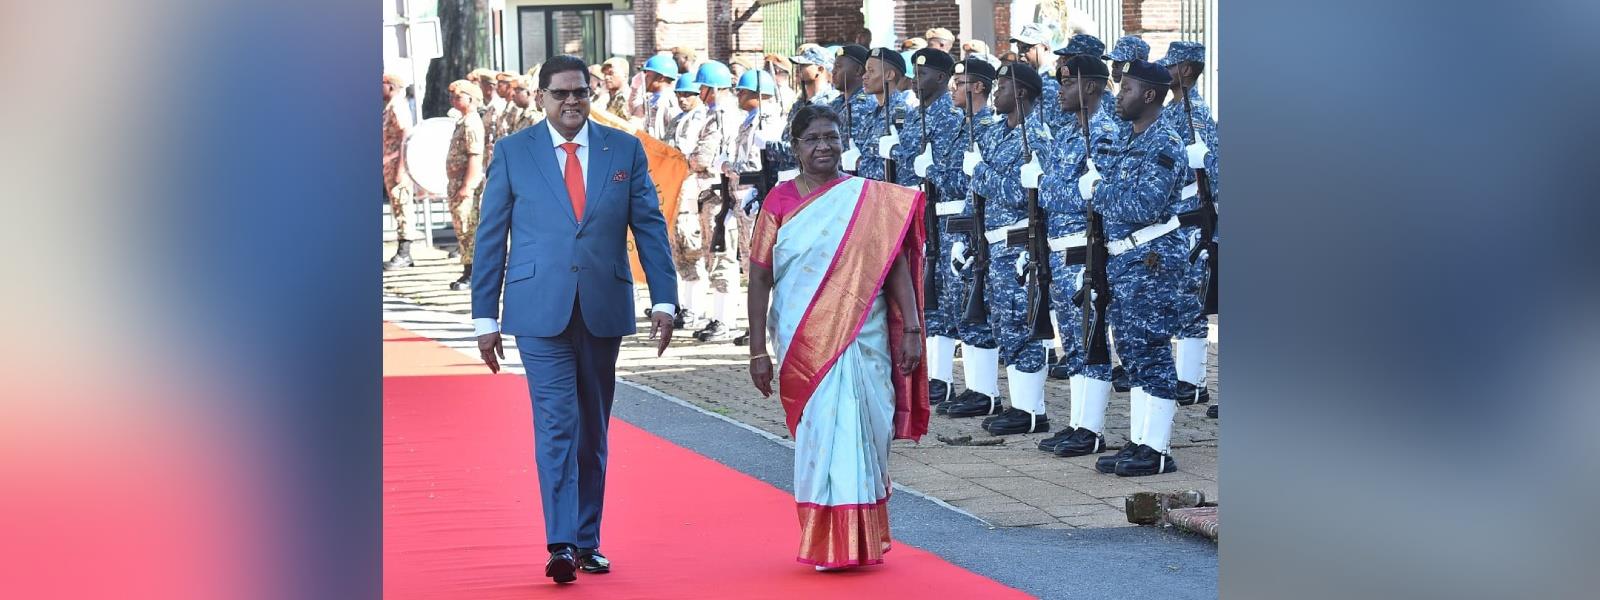 President Smt. Droupadi Murmu received a warm welcome from H.E. Mr. Chandrikapersad Santokhi, President of Suriname at the Presidential palace in Paramaribo, Suriname